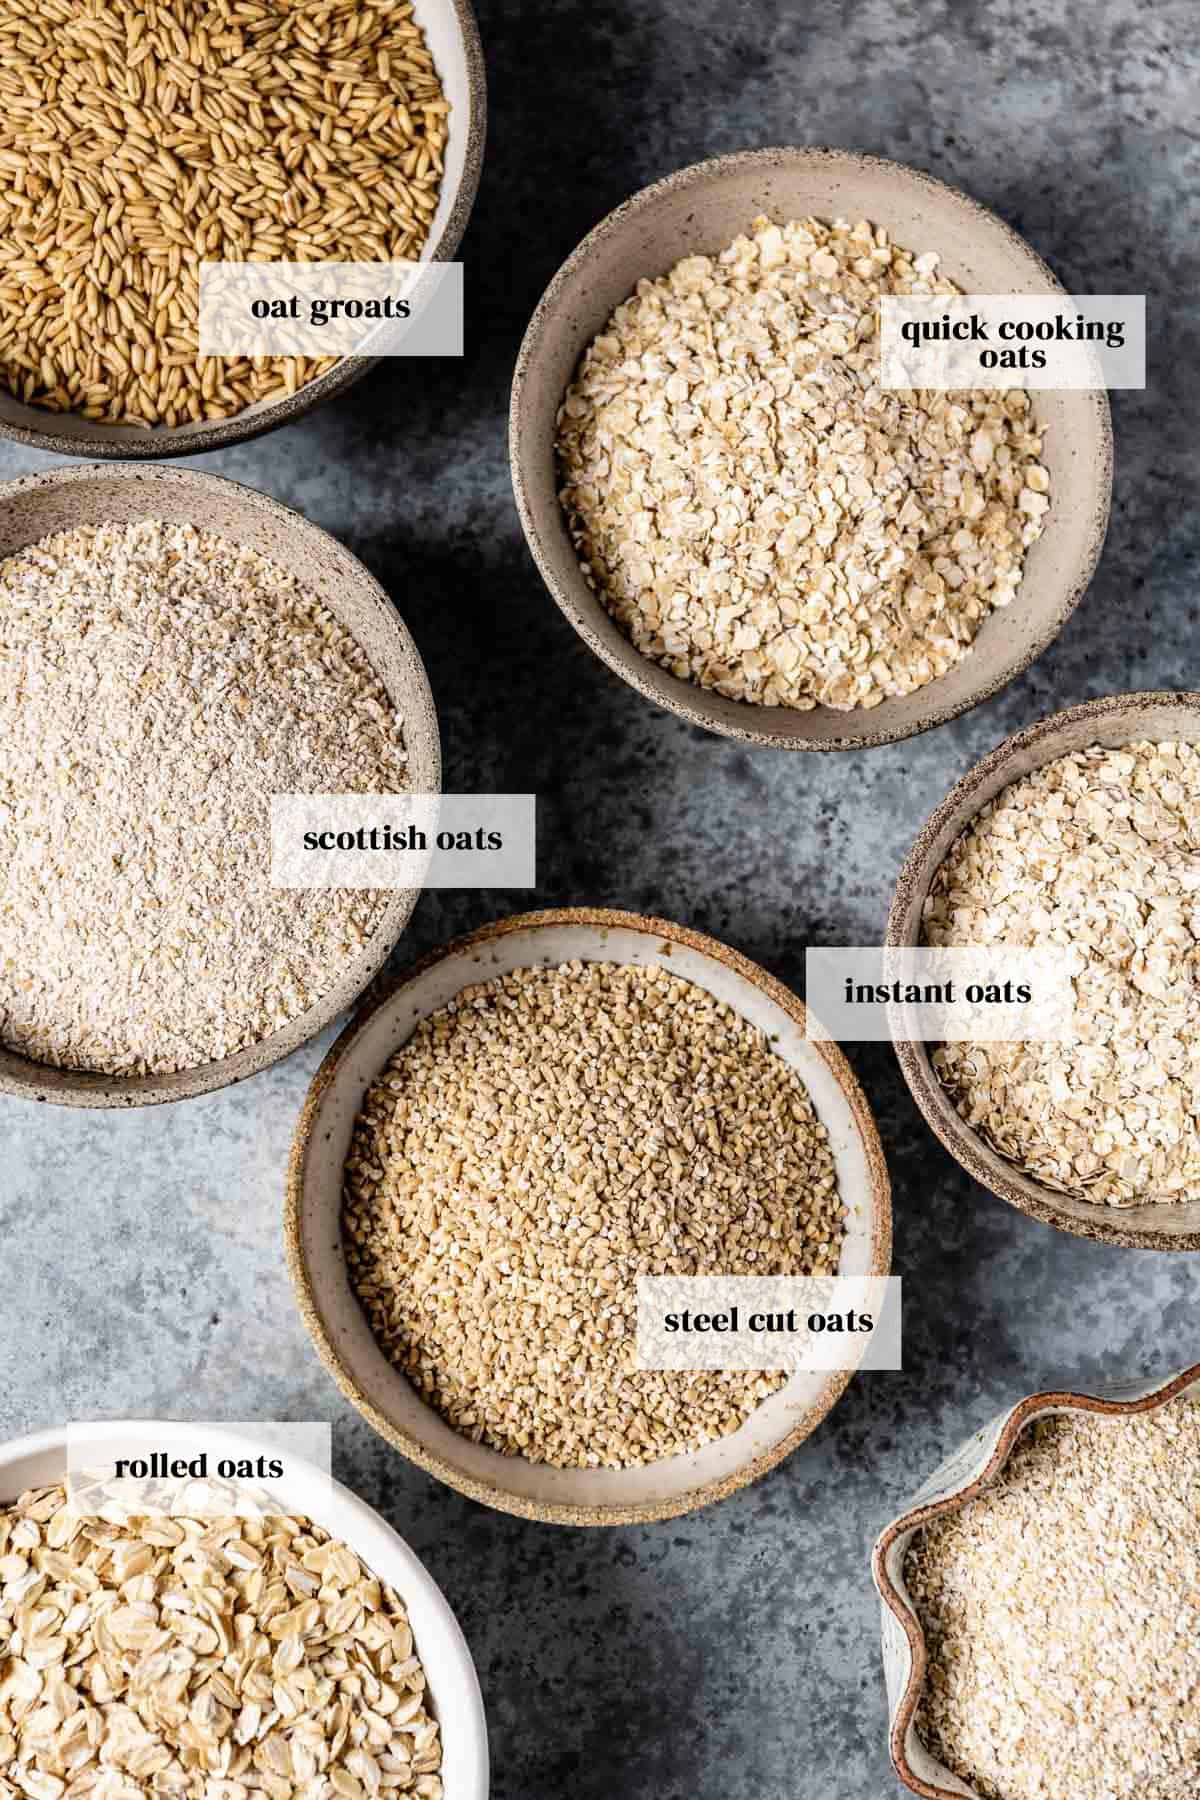 Different types of oats in small bowls with a text on each bowl.